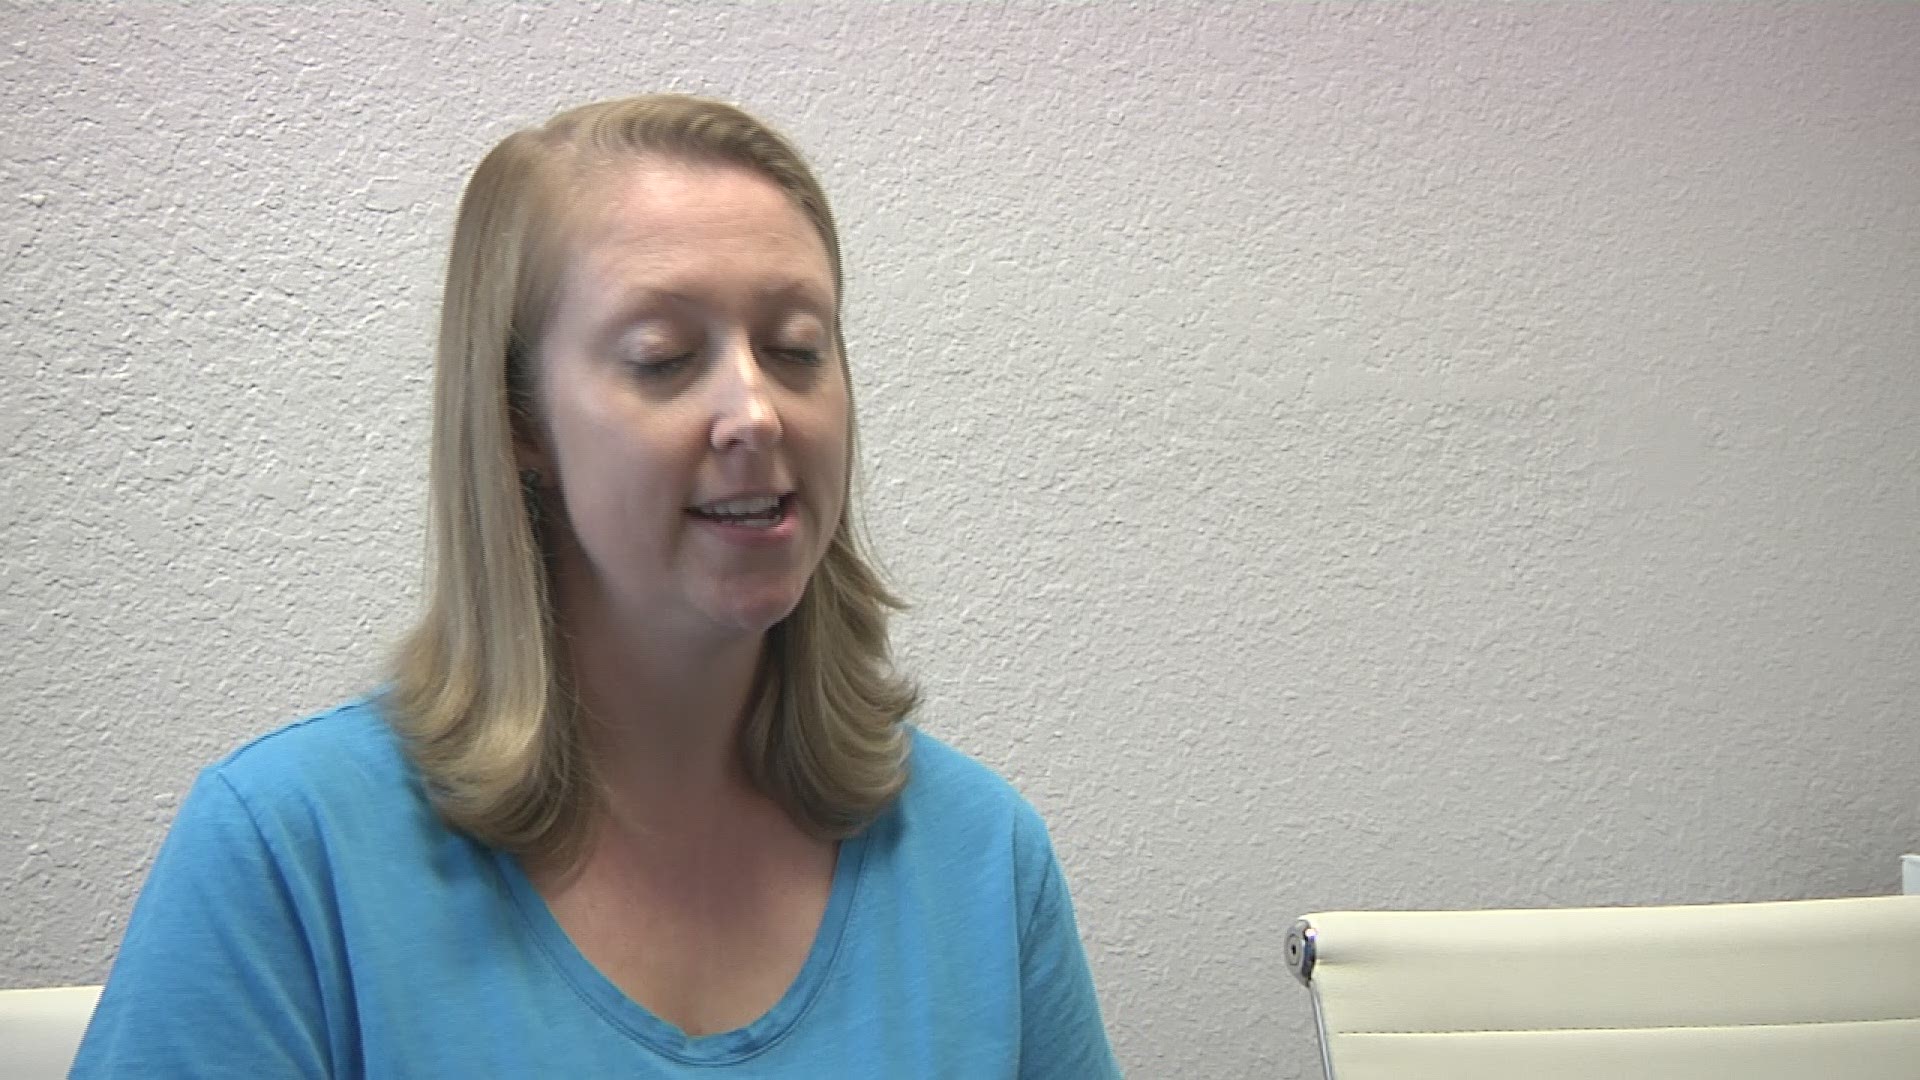 Jessica Foran, Director of Survivor Advocacy for UnBound and Case Director for the Heart of Texas Human Trafficking coalition, explains the signs of human trafficking, especially near a suspicious massage parlor. UnBound is a group in Waco which advocates